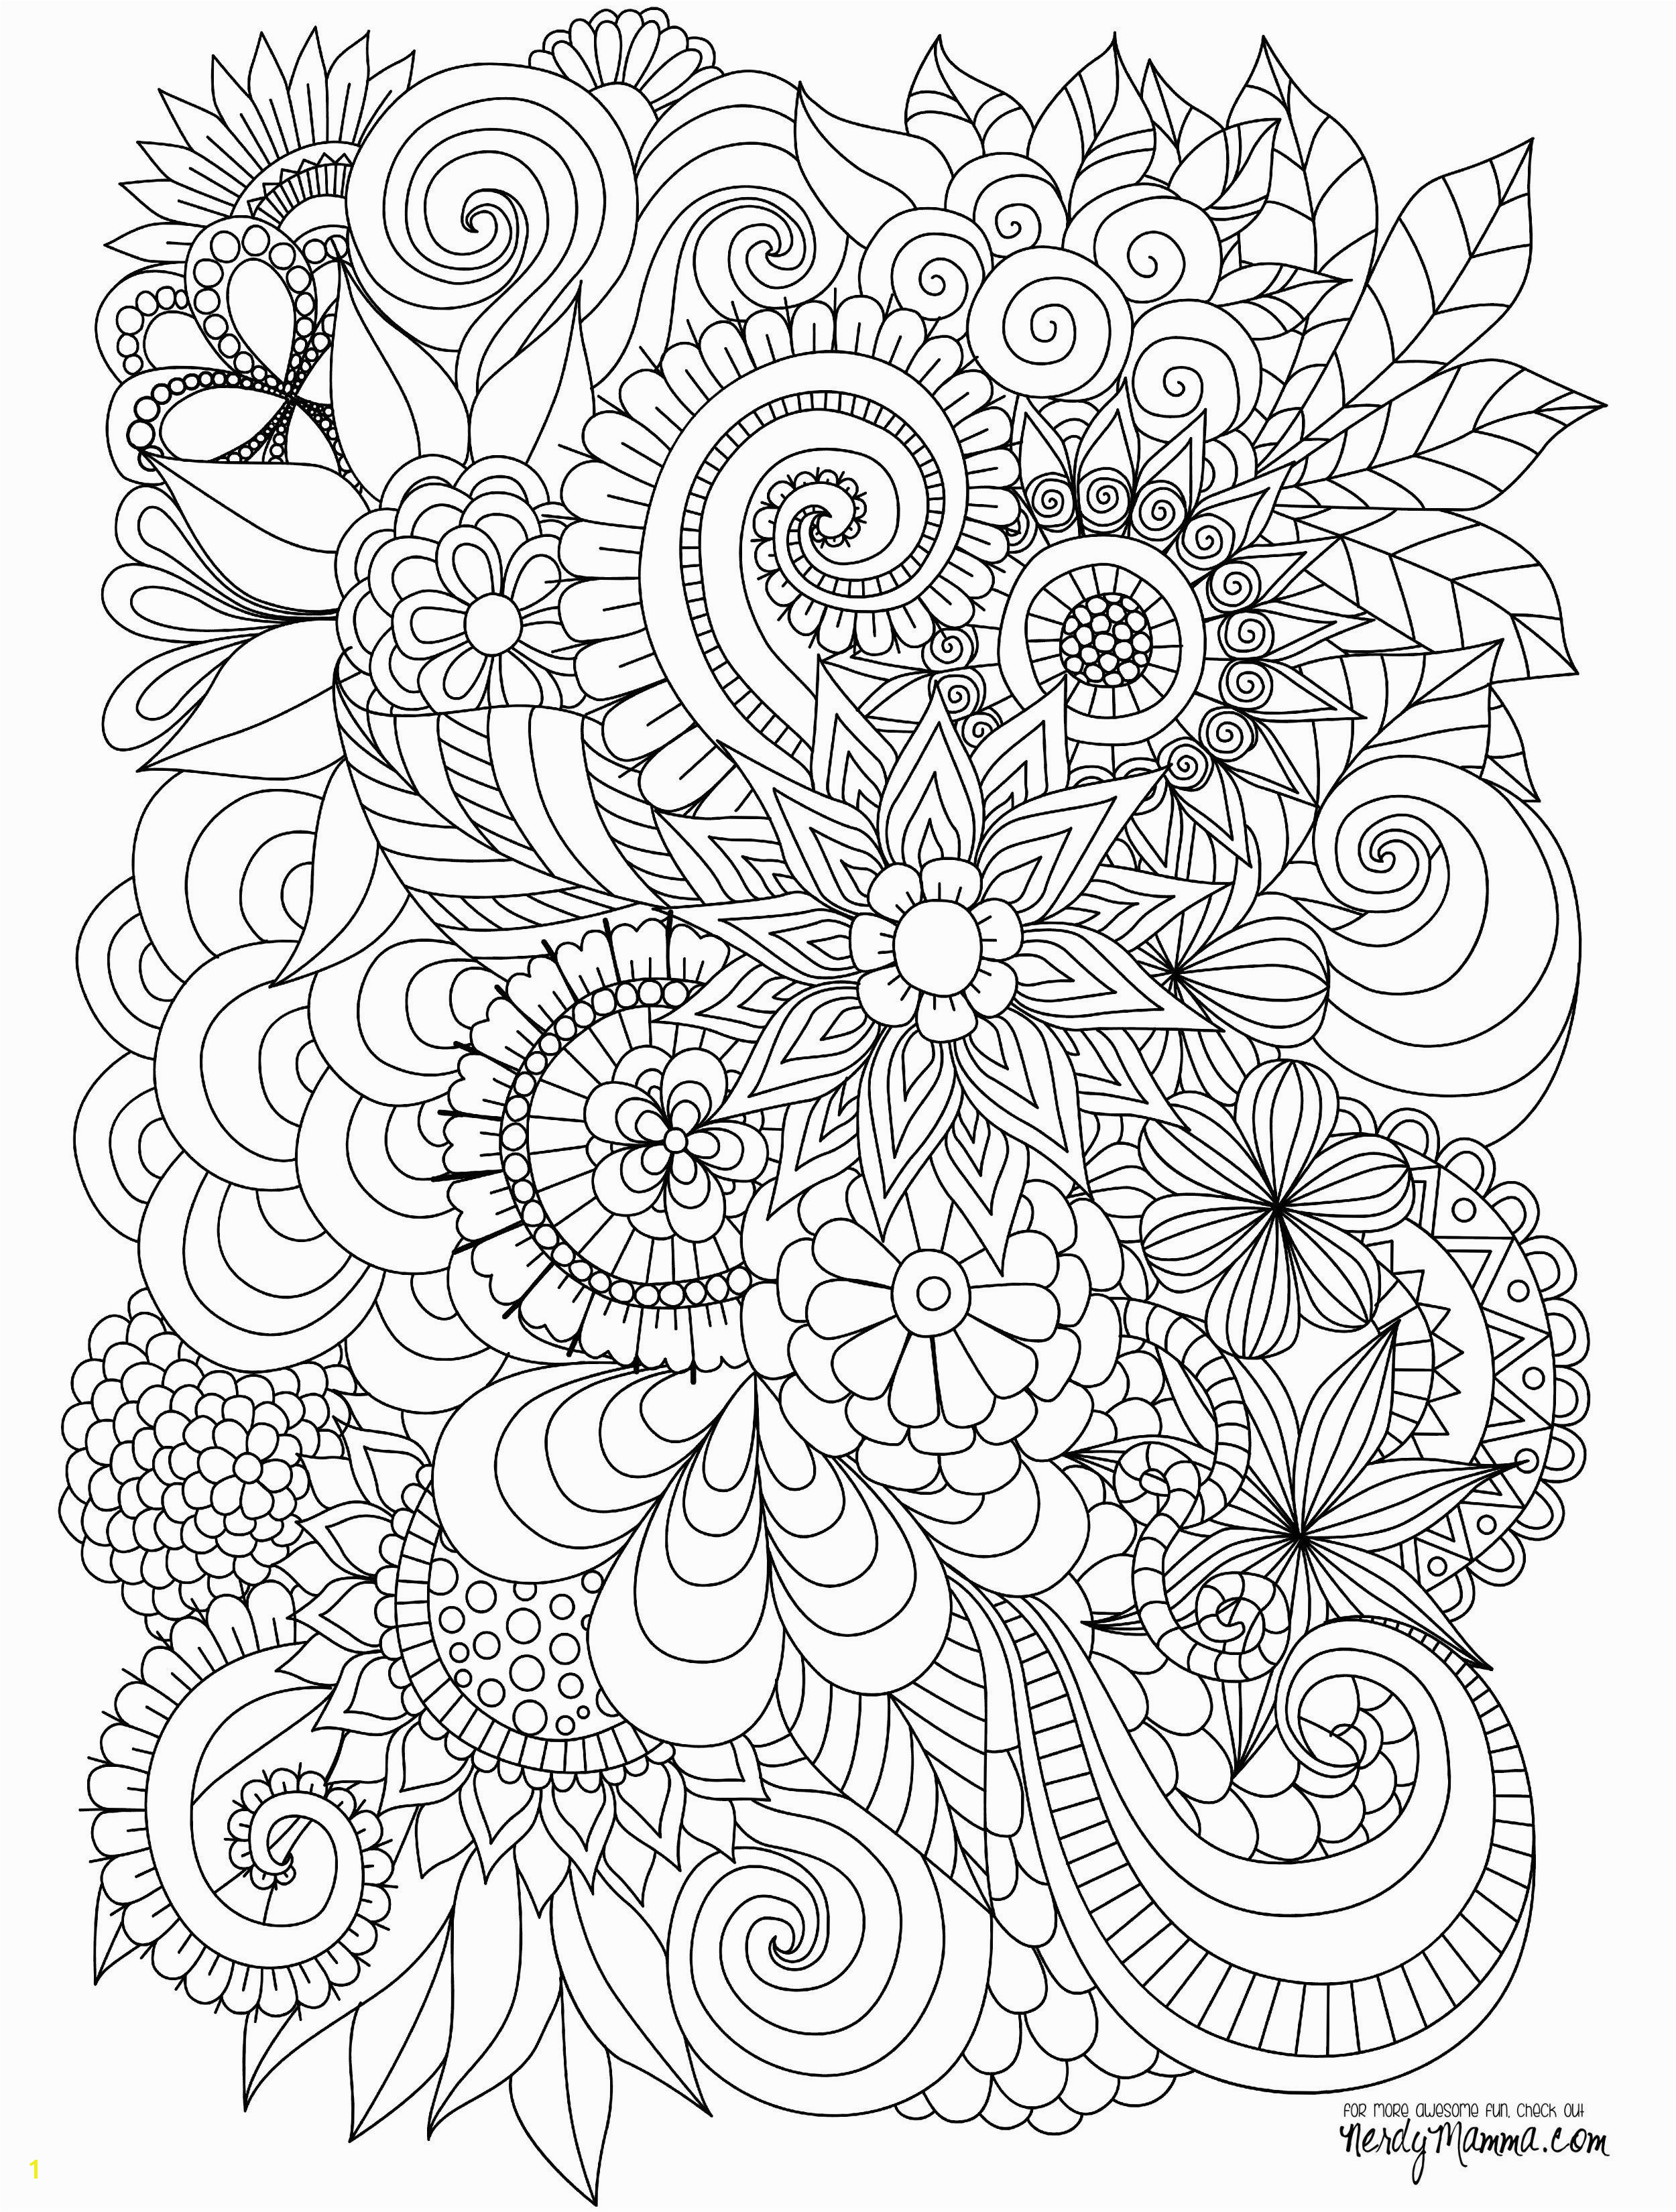 Printable Complex Coloring Pages Pdf Flowers Abstract Coloring Pages Colouring Adult Detailed Advanced